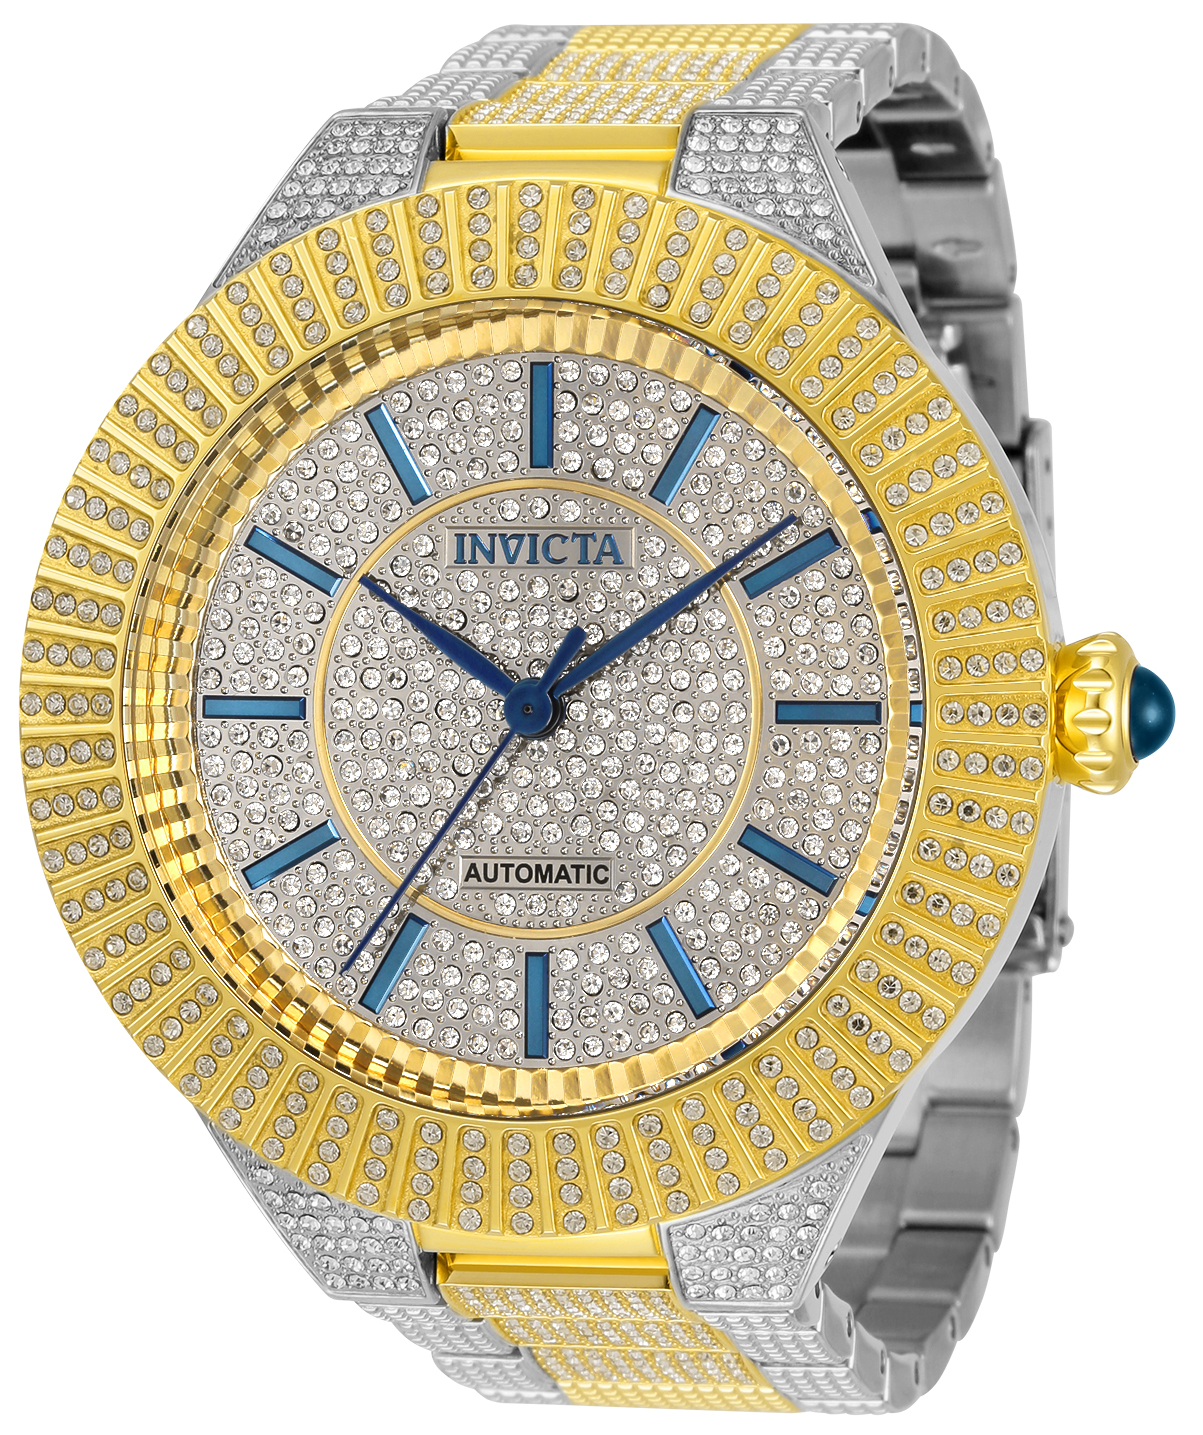 Invicta Specialty Automatic Men's Watch - 54mm, Steel, Gold (34588)